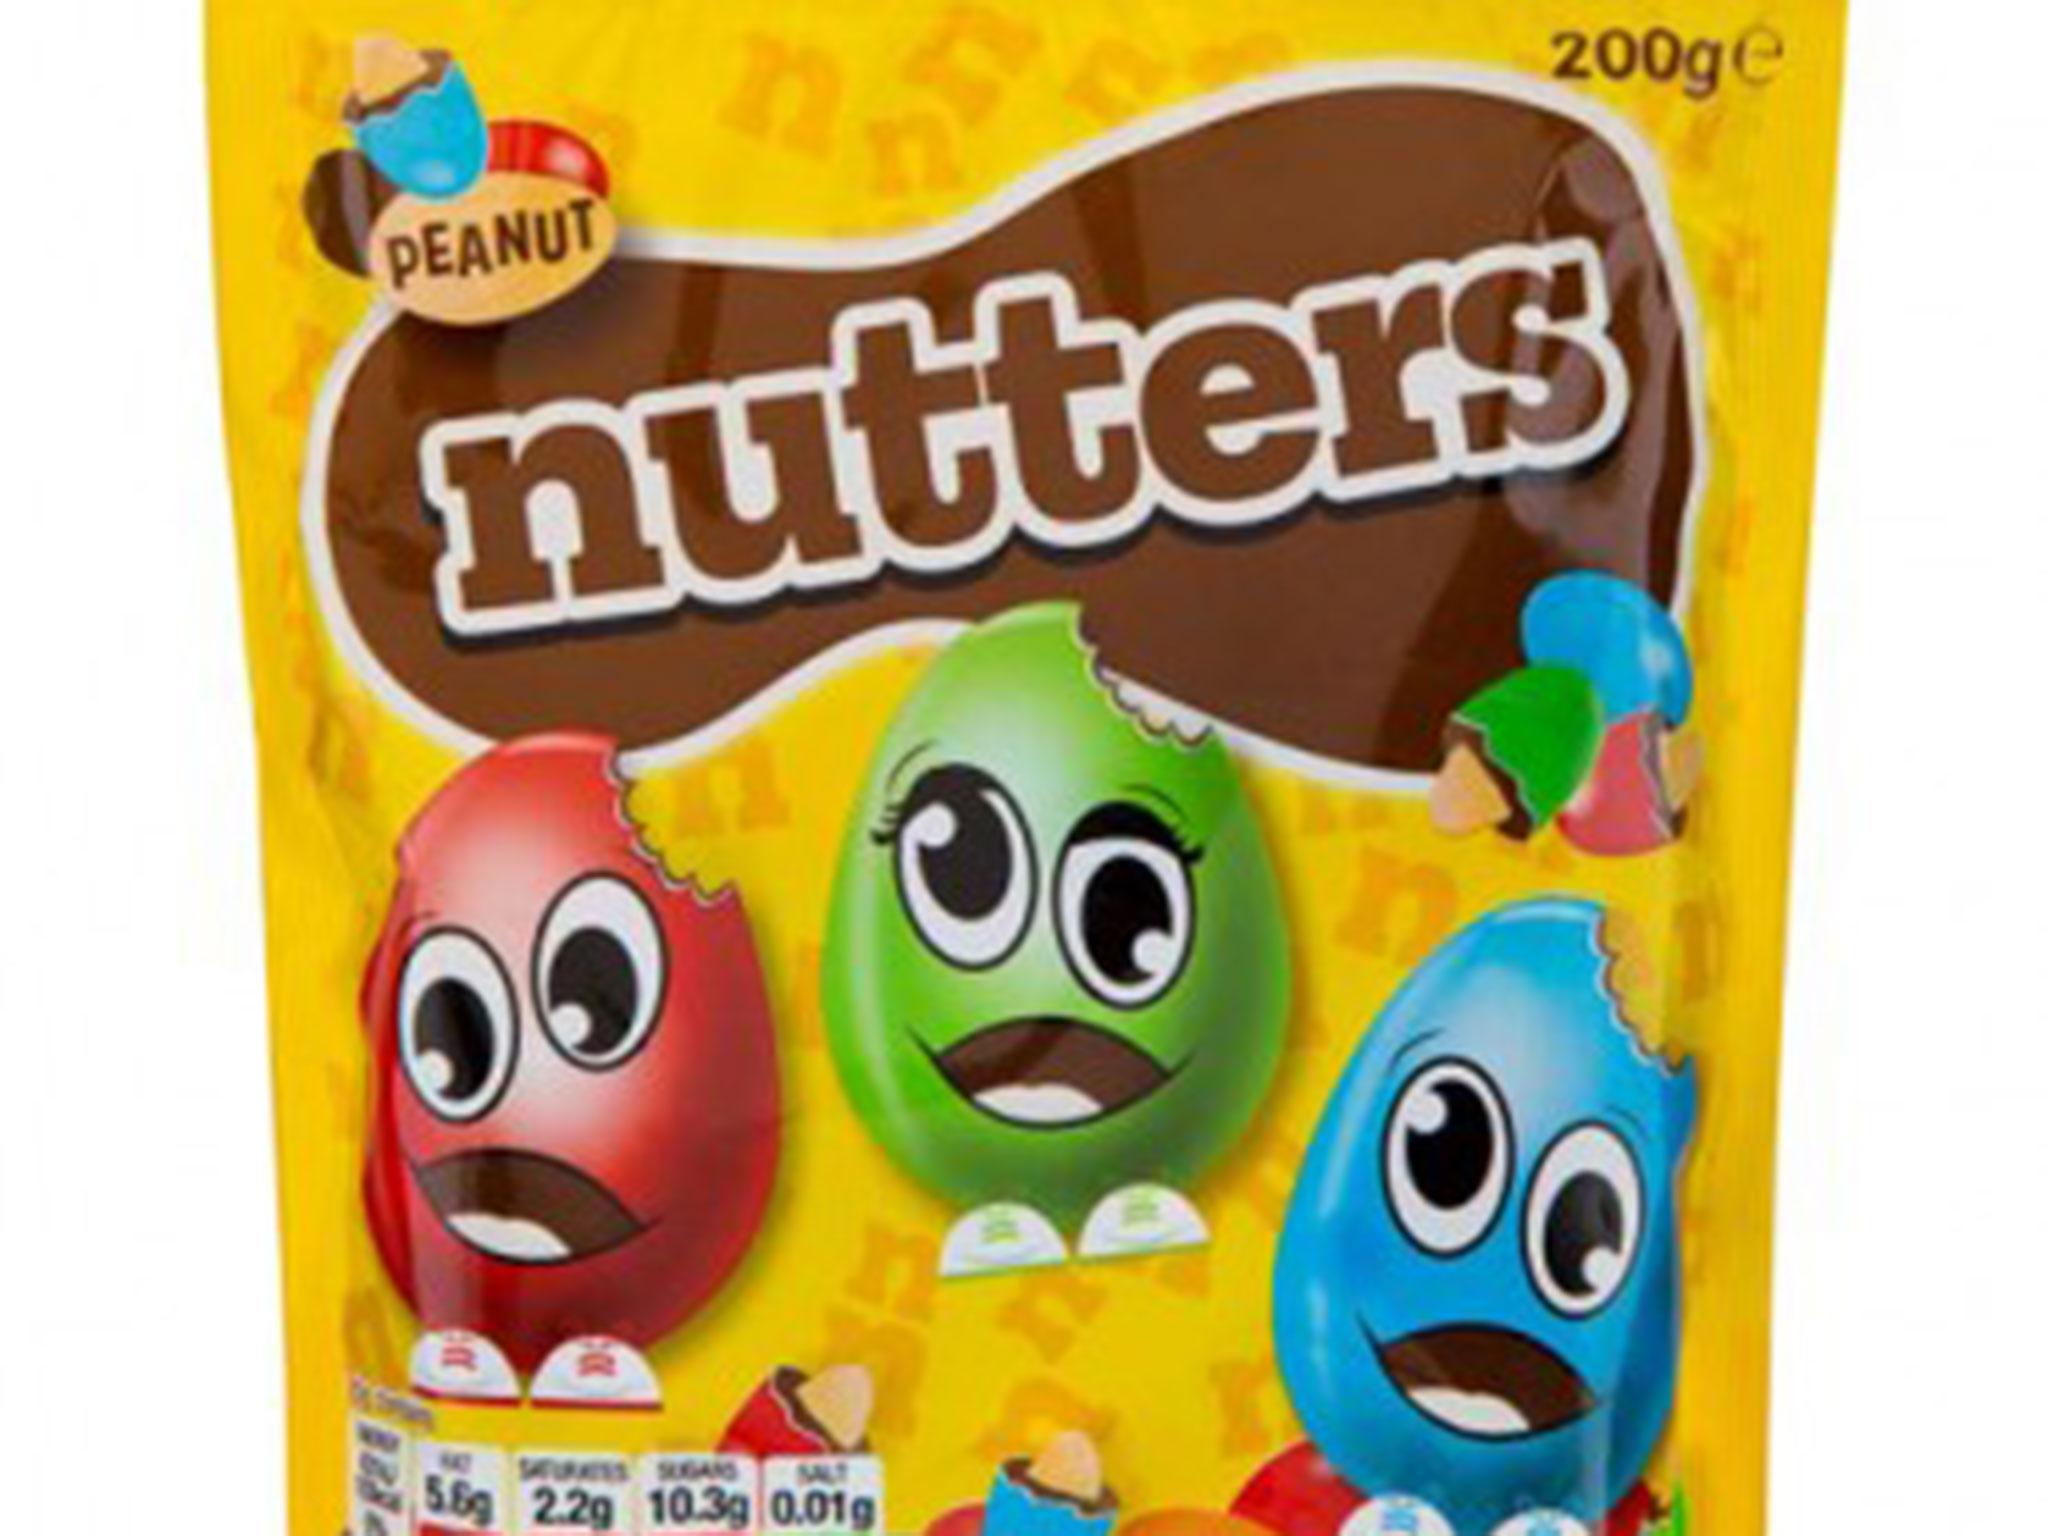 The chocolate-covered nuts are similar to M&Ms